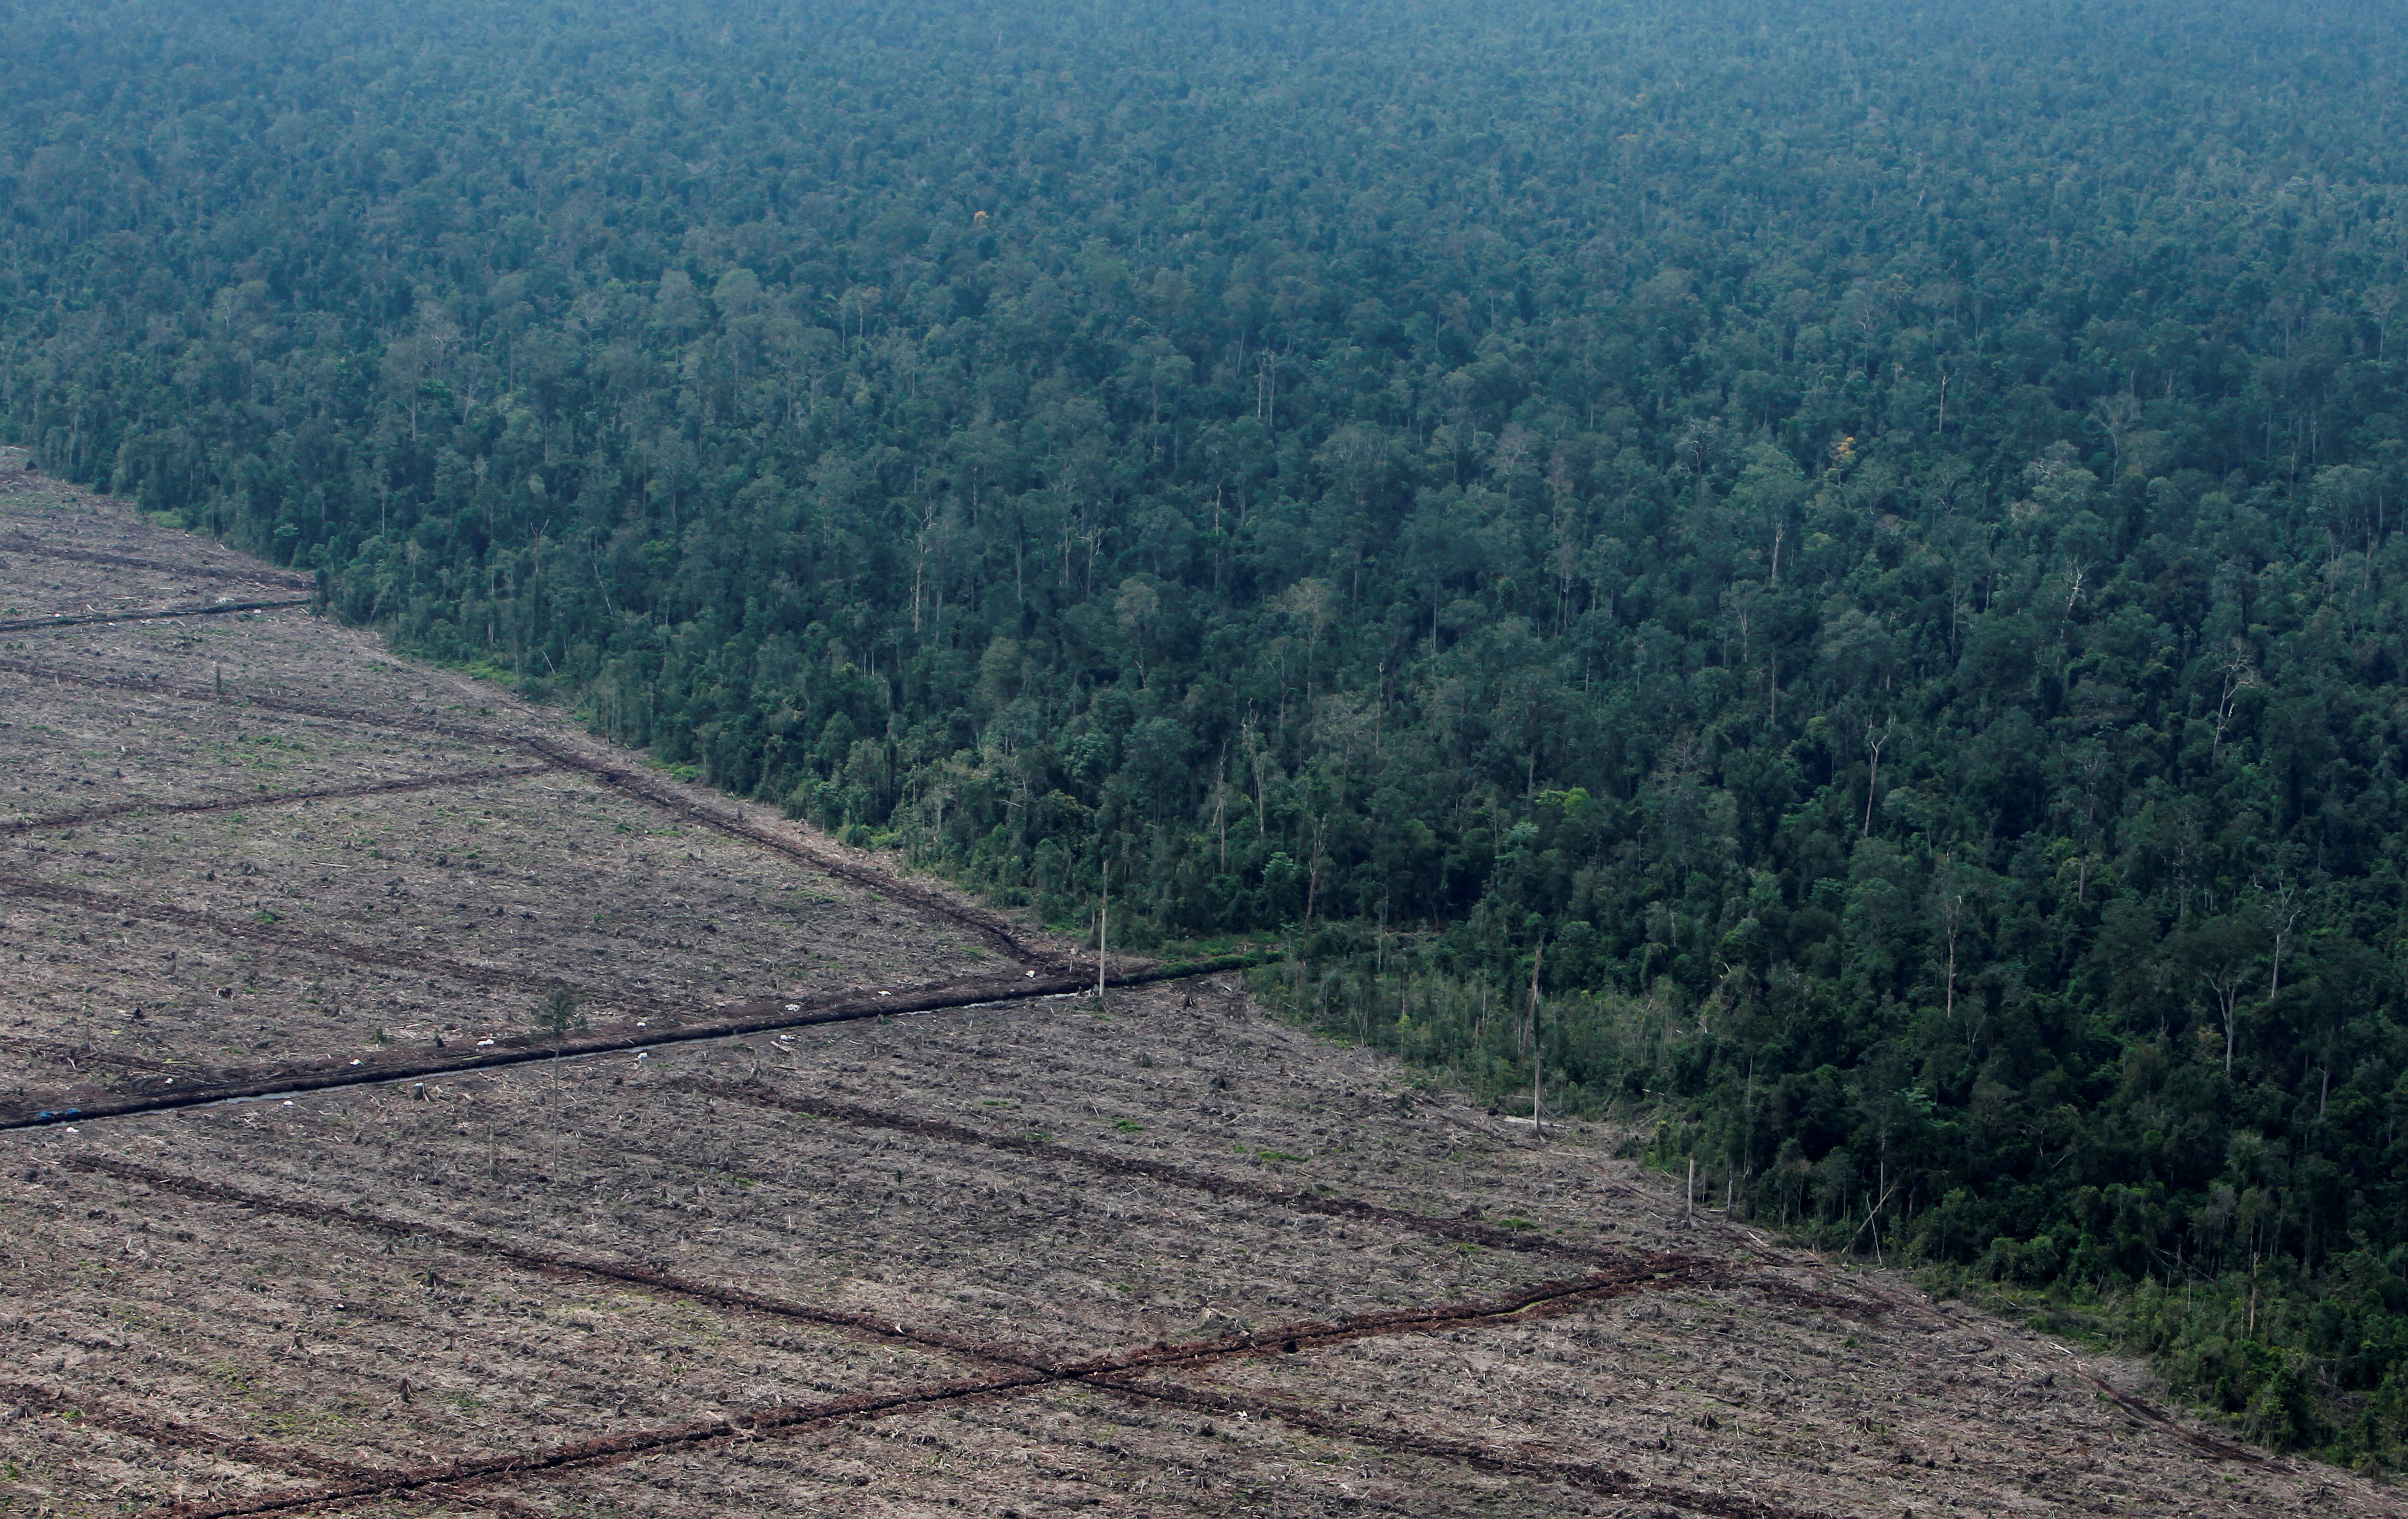 A view of deforestation on Indonesia's Sumatra island